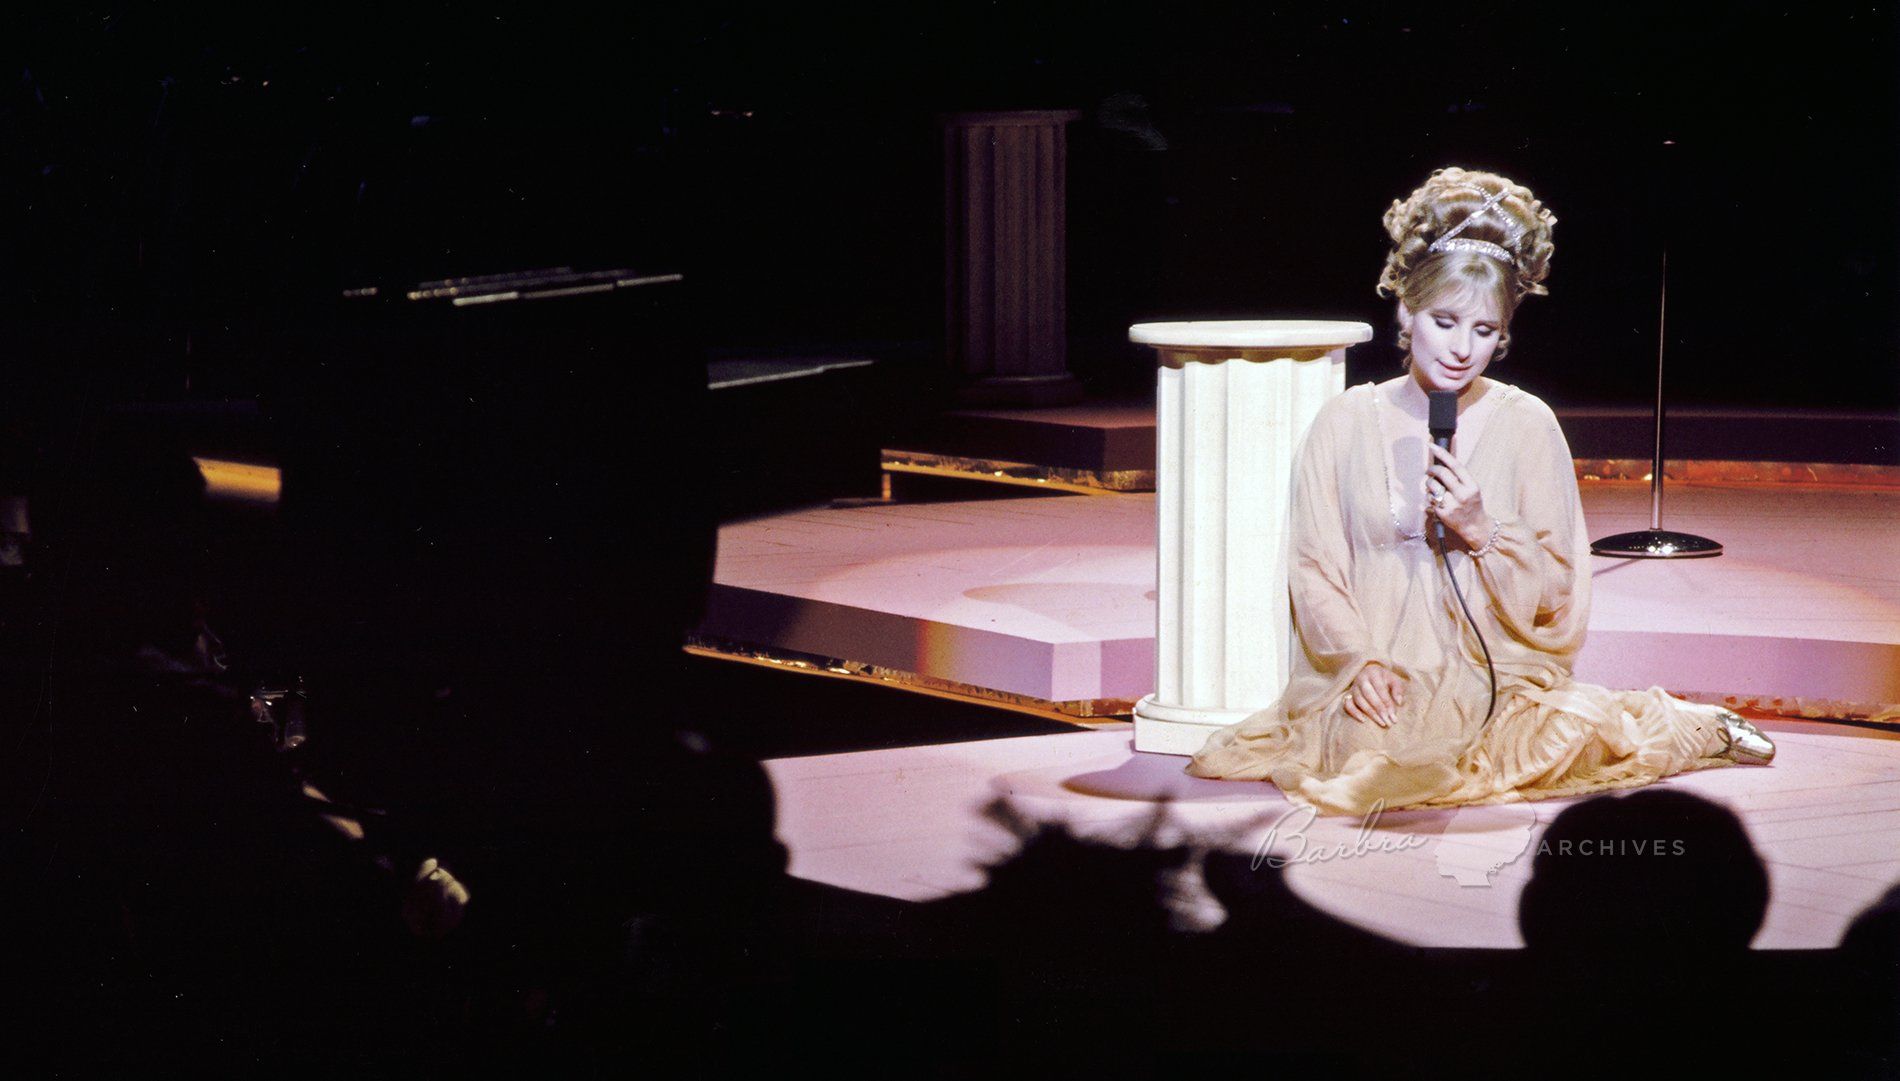 Streisand sitting on the stage and singing a song at the International Hotel